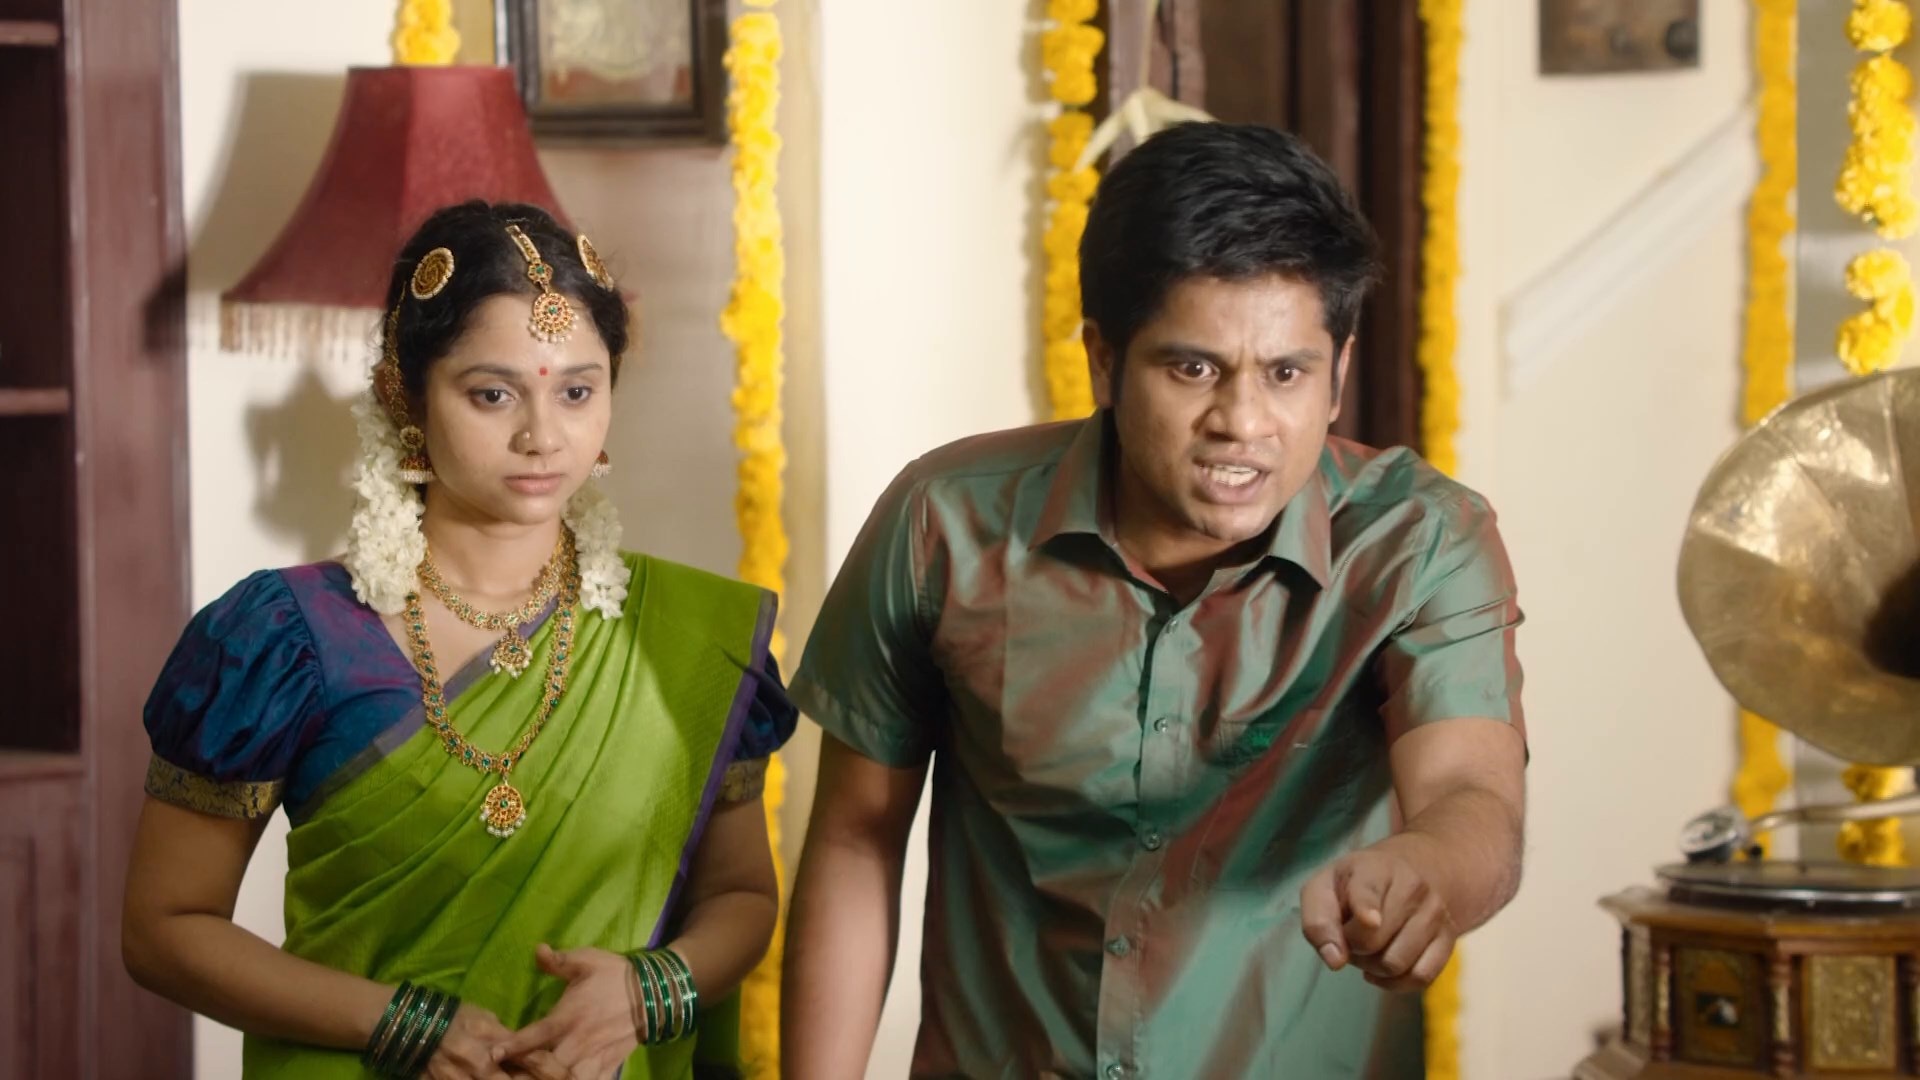 Anantham S01 Torrent Kickass in HD quality 1080p and 720p 2022 Movie | kat | tpb Screen Shot 2